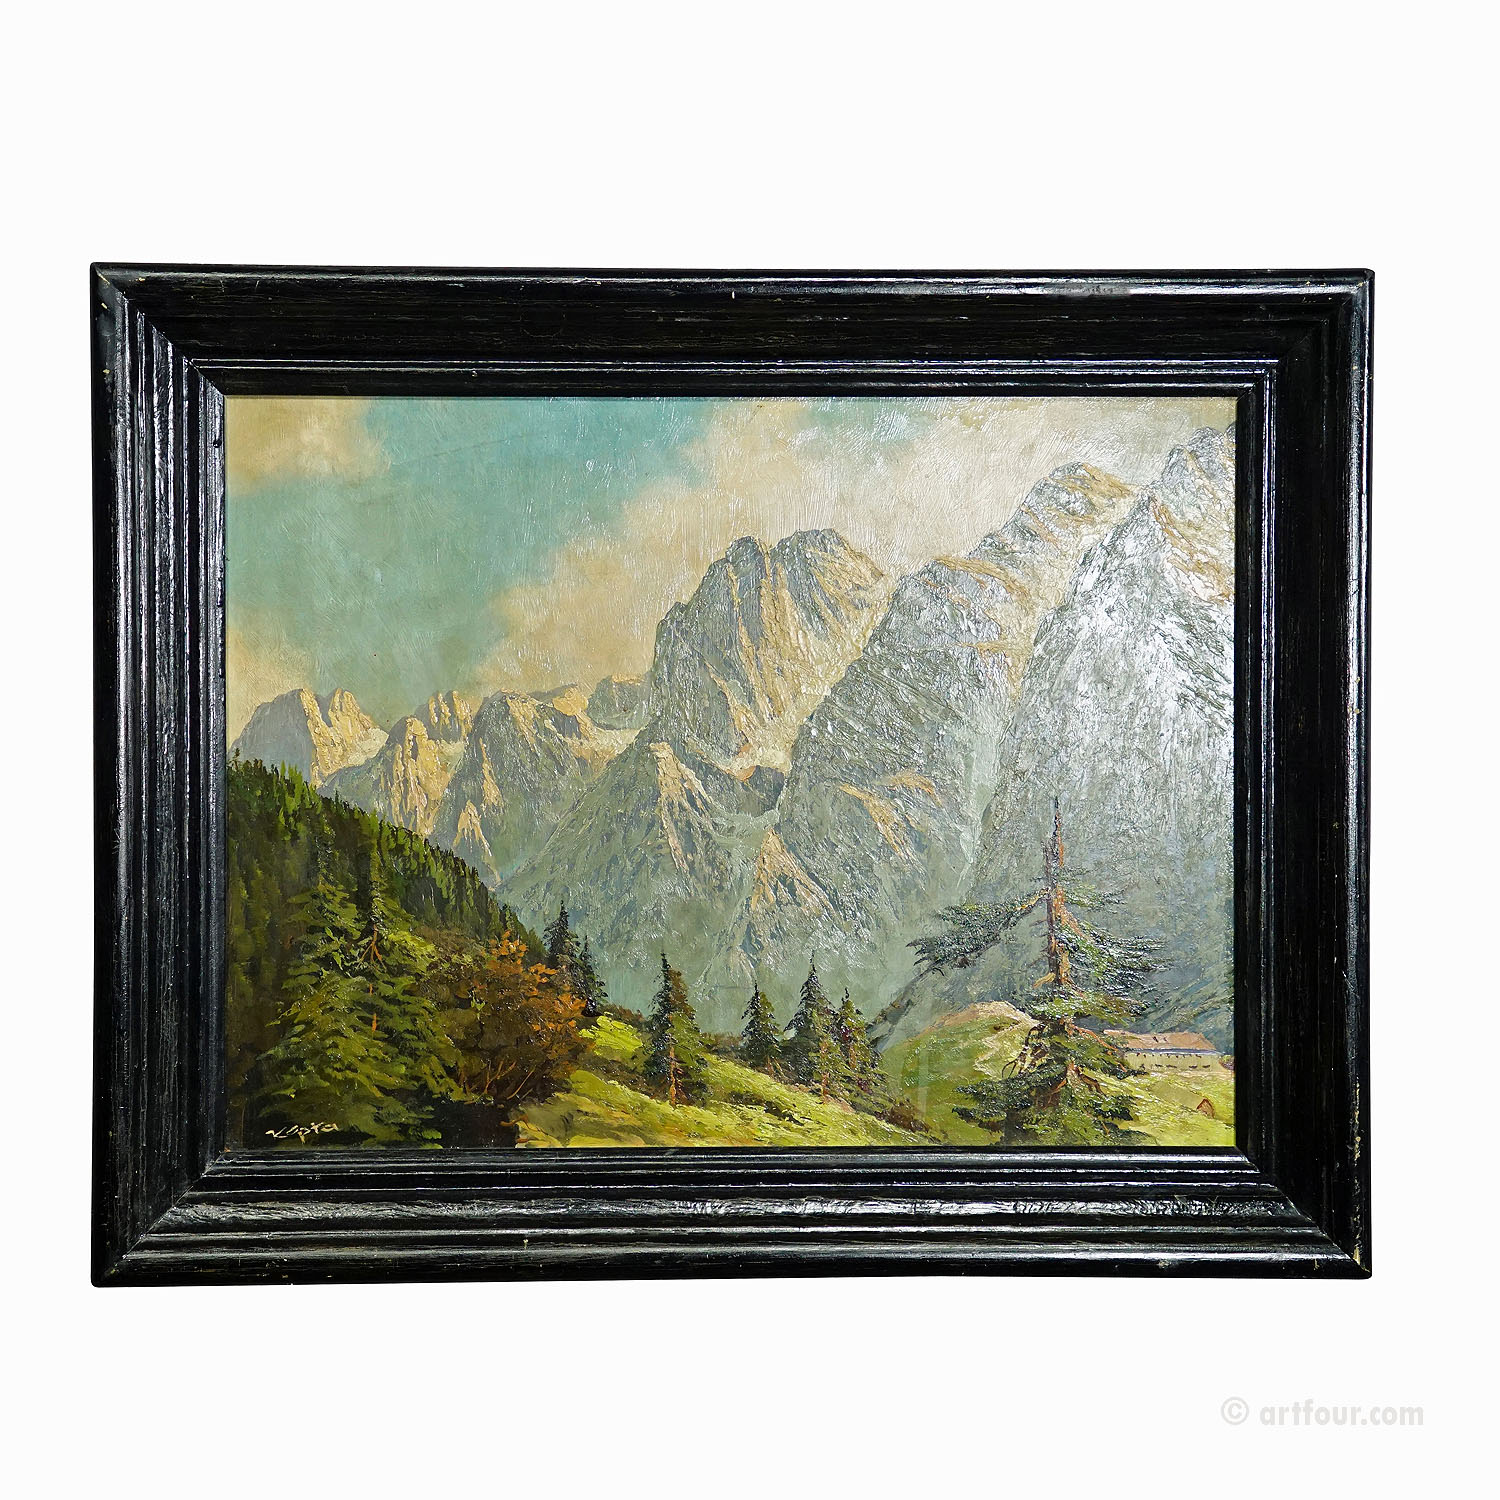 Summerly High Mountain Landscape, Oil on Board Painting, late 19th century